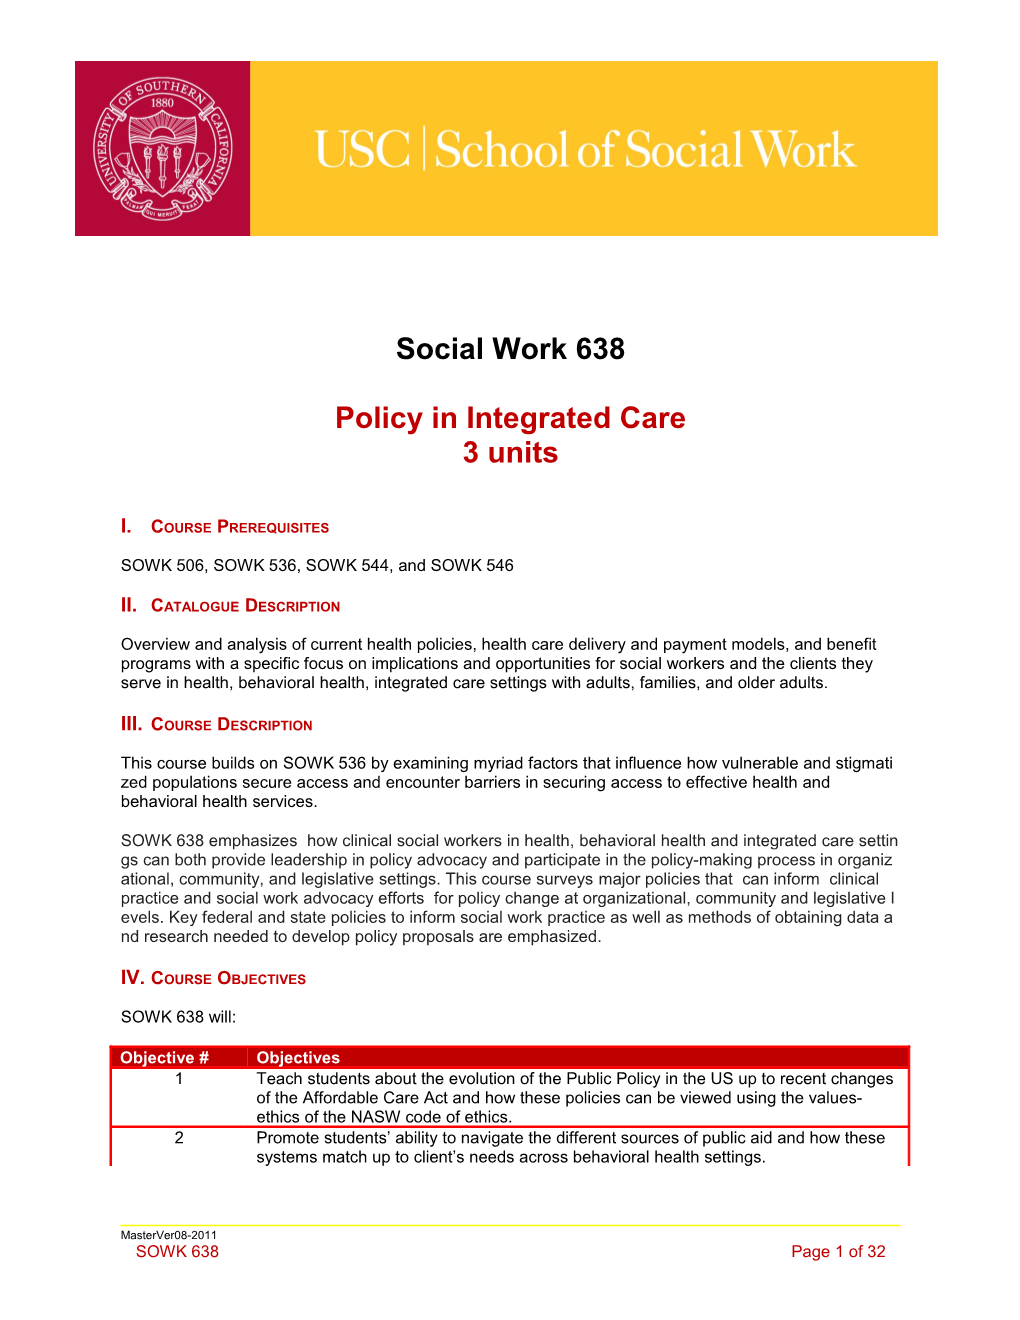 School of Social Work Syllabus Template Guide s10